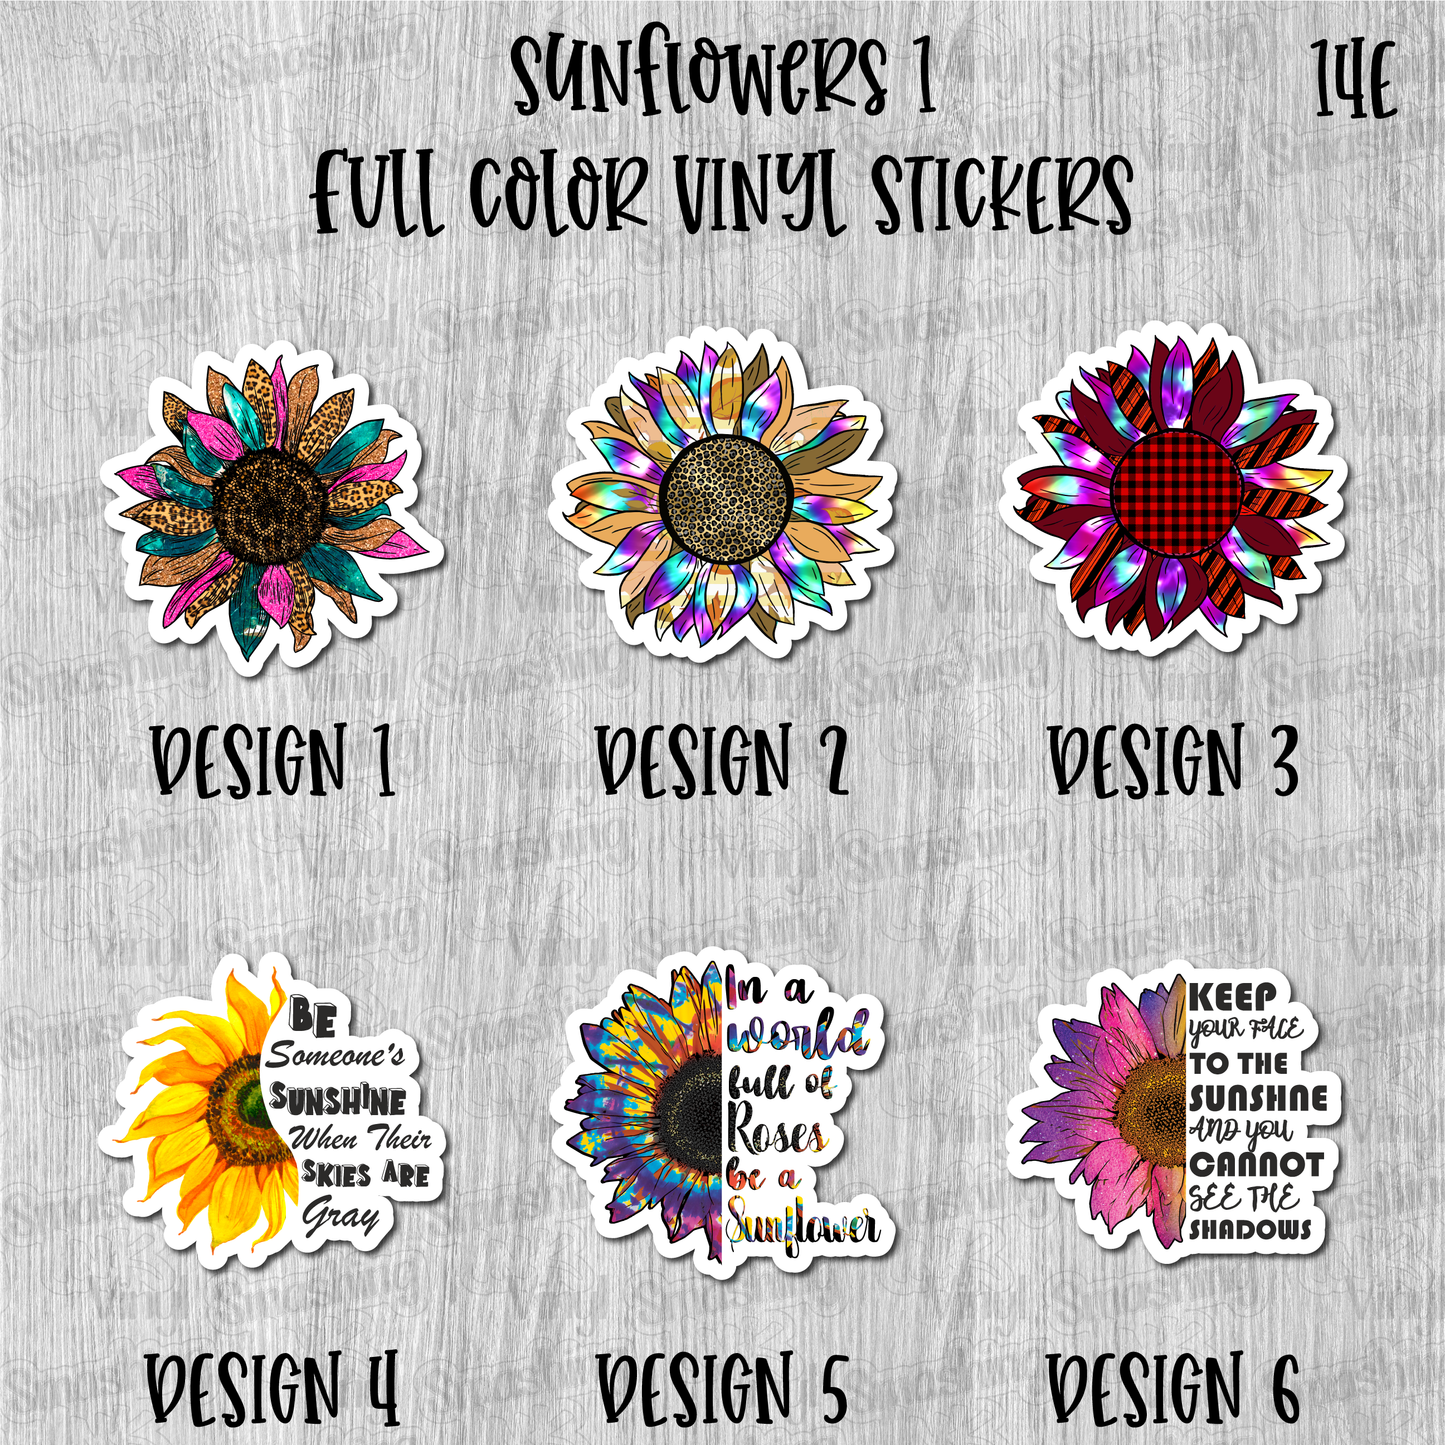 Sunflowers 1 - Full Color Vinyl Stickers (SHIPS IN 3-7 BUS DAYS)